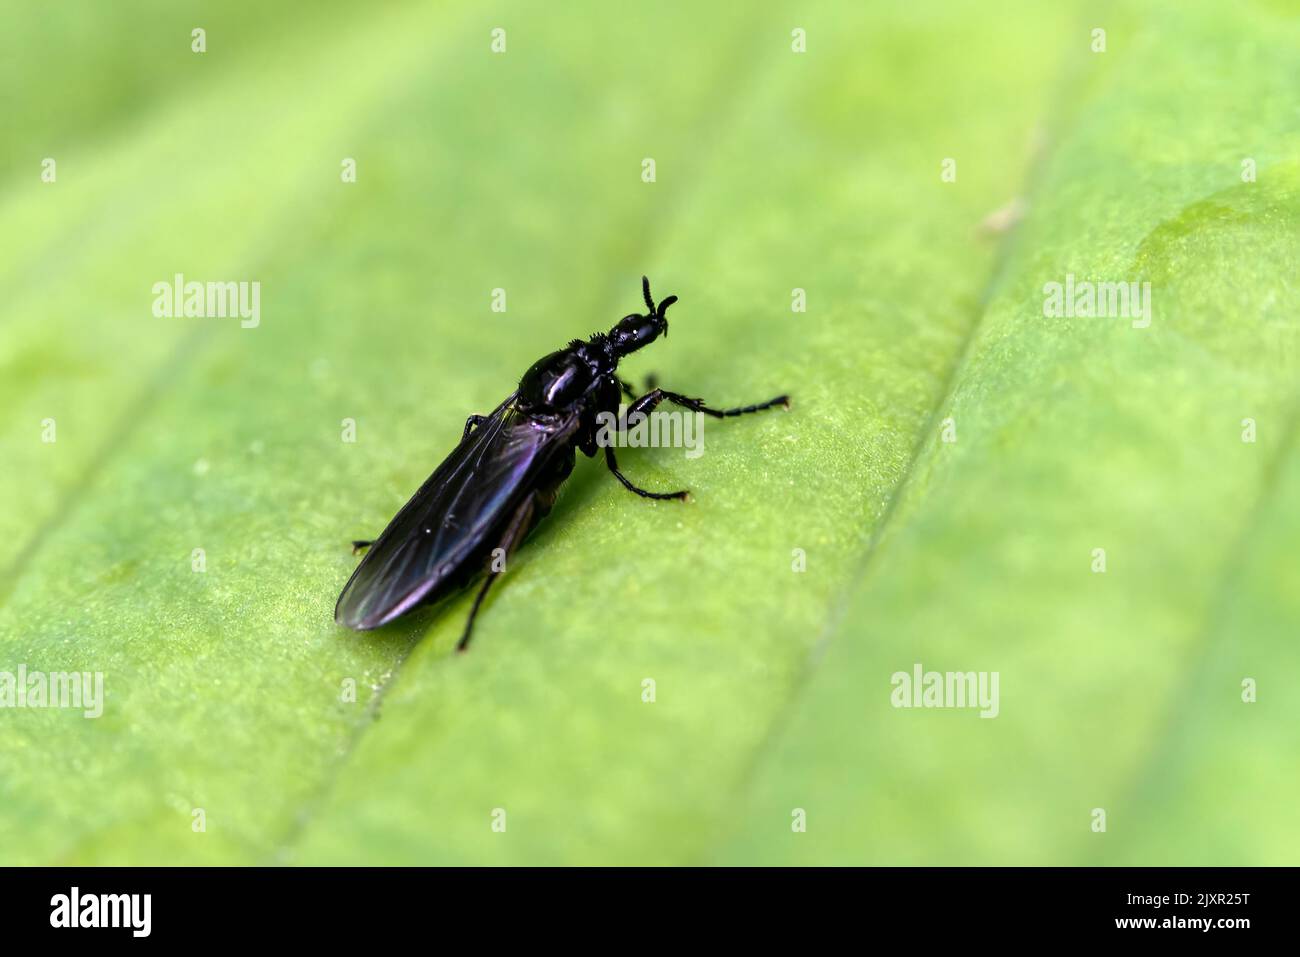 Fever fly (Dilophus febrilis) a black flying insect species found in the UK and Europe stock photo image Stock Photo